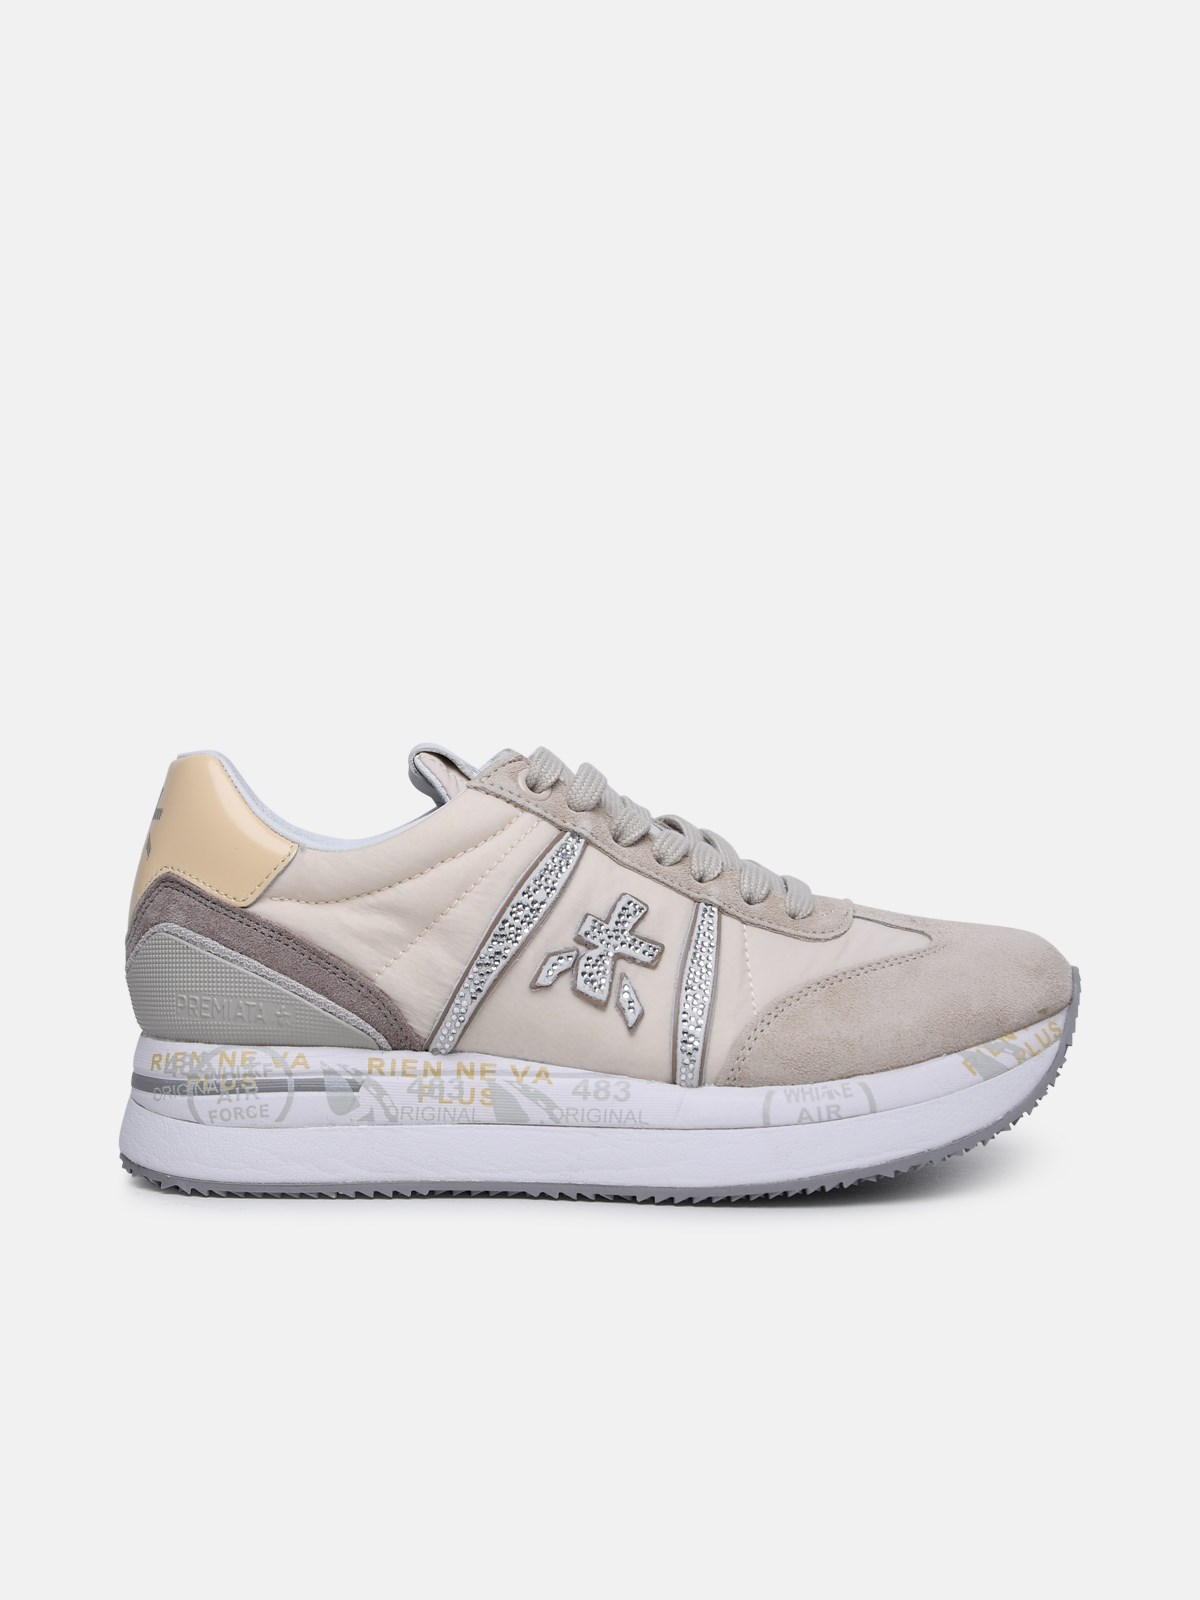 Premiata 'conny' Beige Leather And Nylon Sneakers